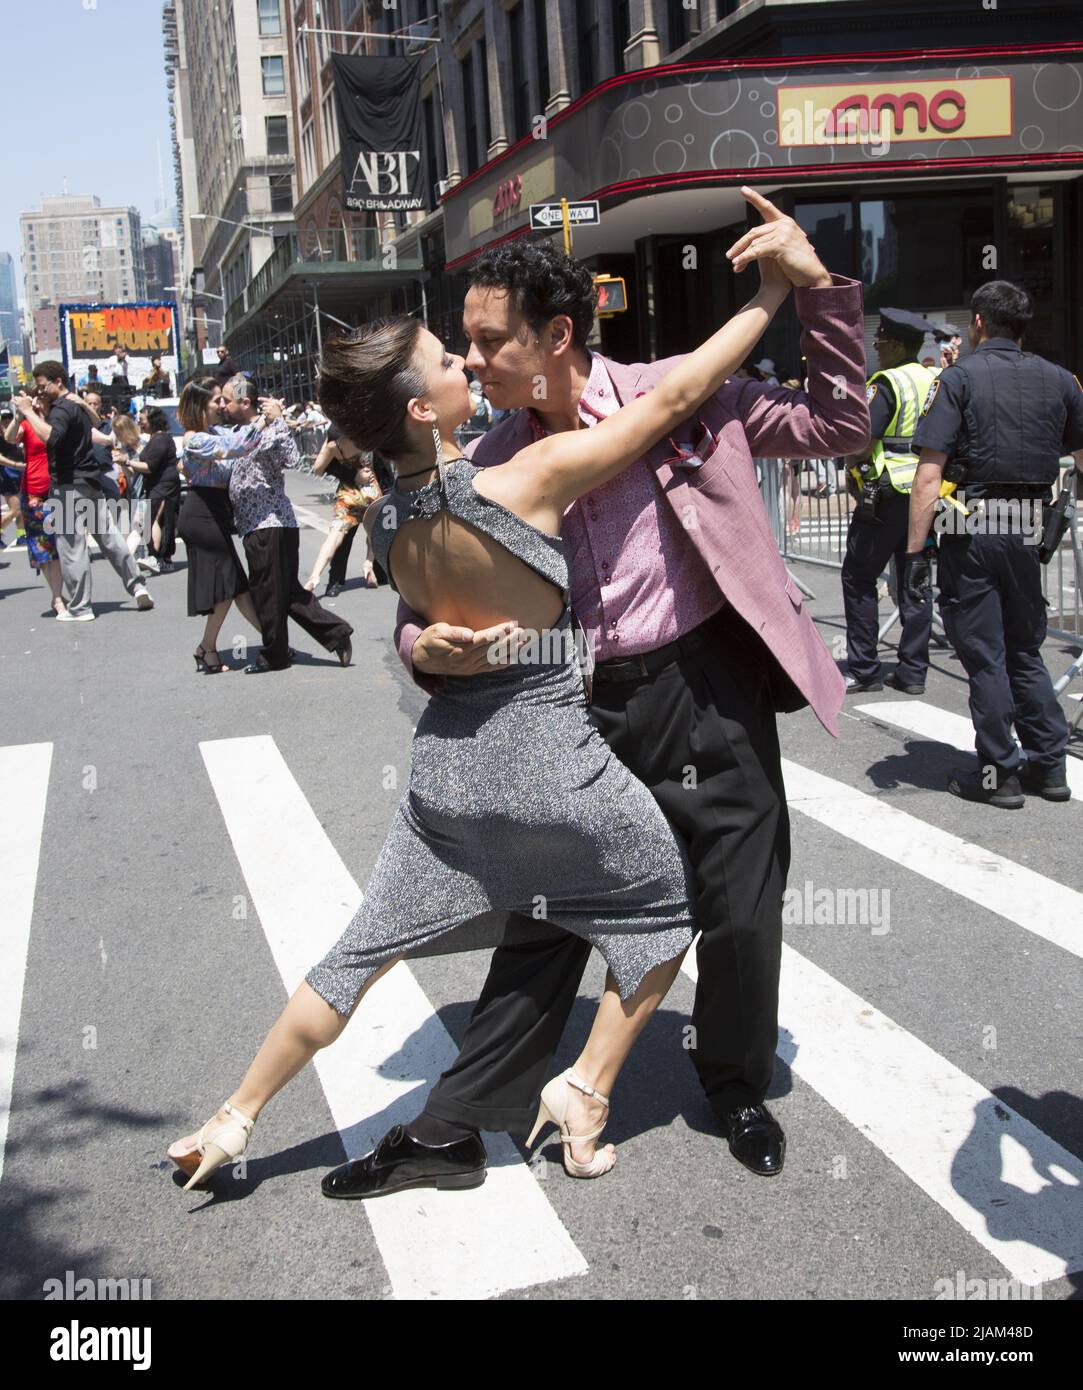 New York City Dance Parade winds its way down Broadway in New York City. Doing the Tango down Broadway. Stock Photo